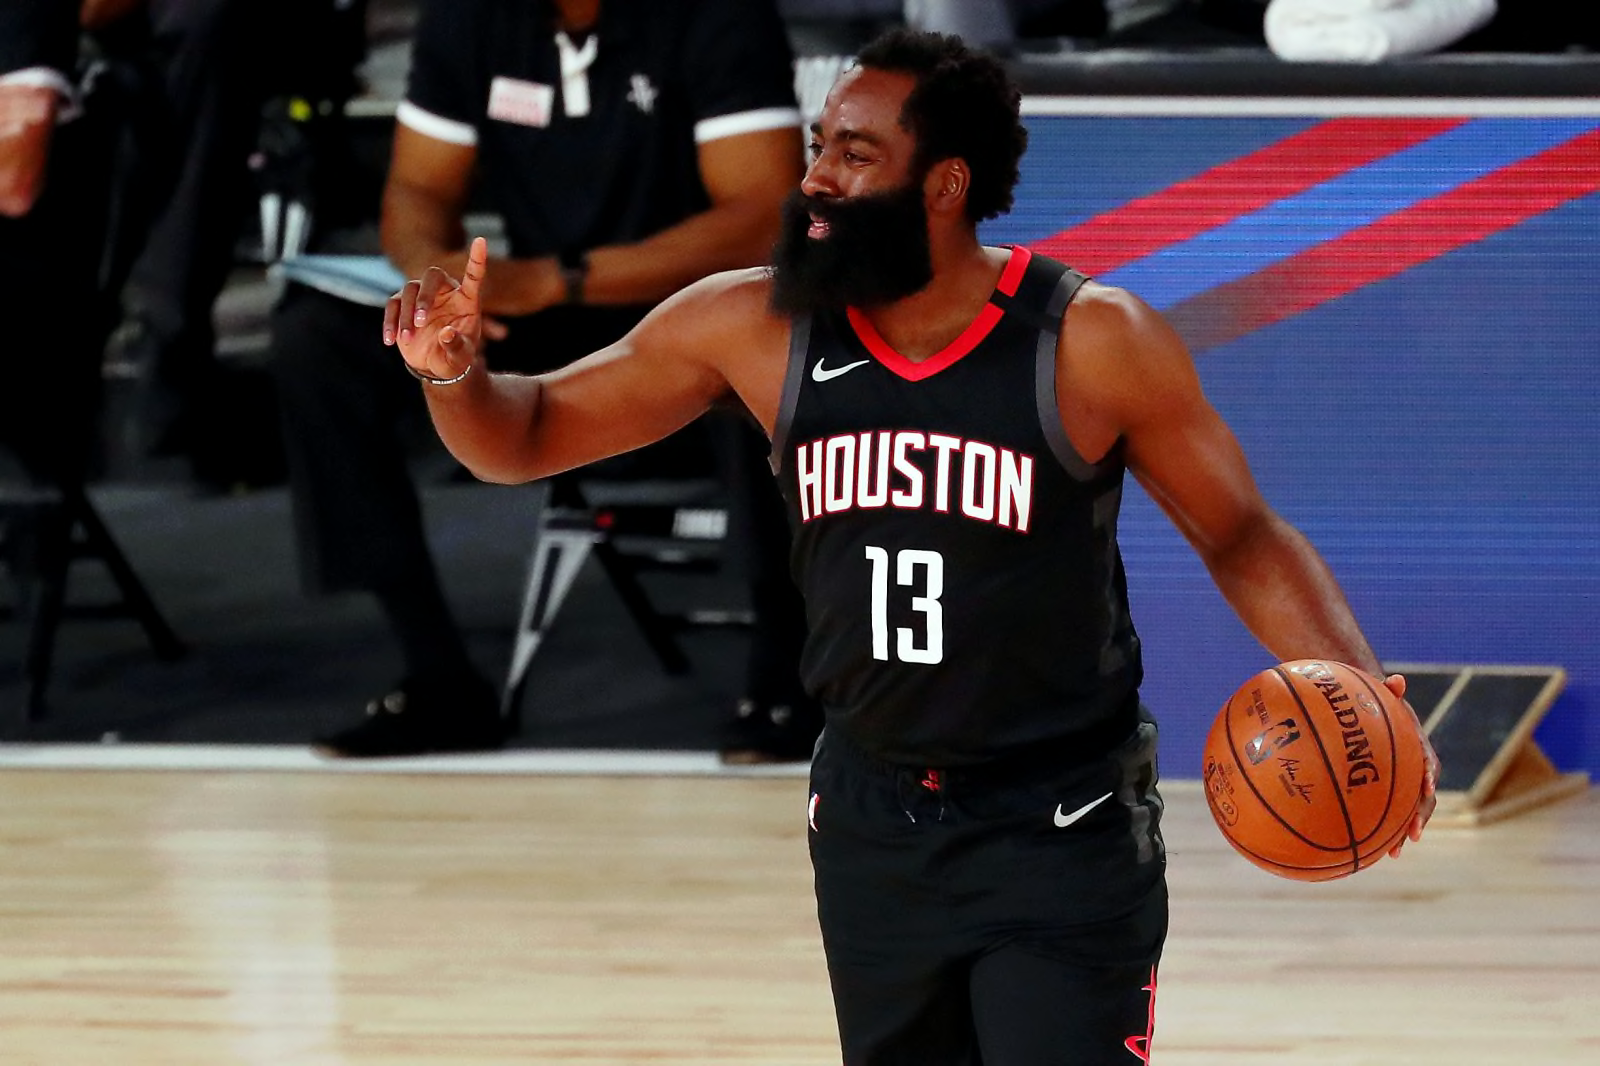 With Game 1 Victory The Houston Rockets Have Set The Tone Vs The Lakers